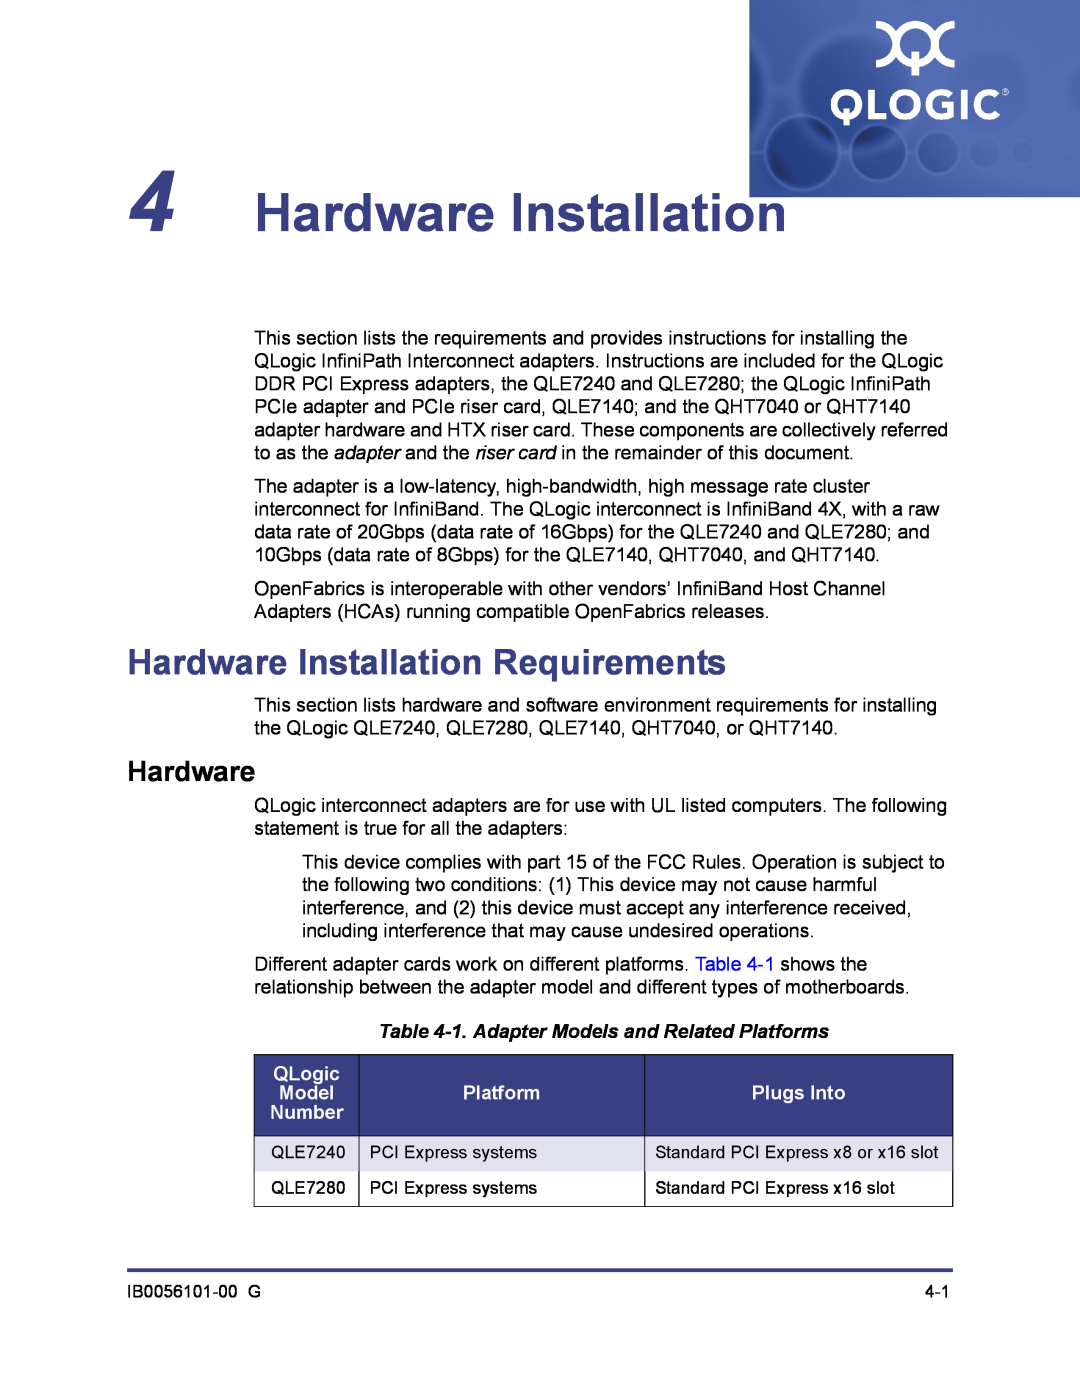 Q-Logic IB0056101-00 G Hardware Installation Requirements, 1. Adapter Models and Related Platforms, QLogic, Plugs Into 